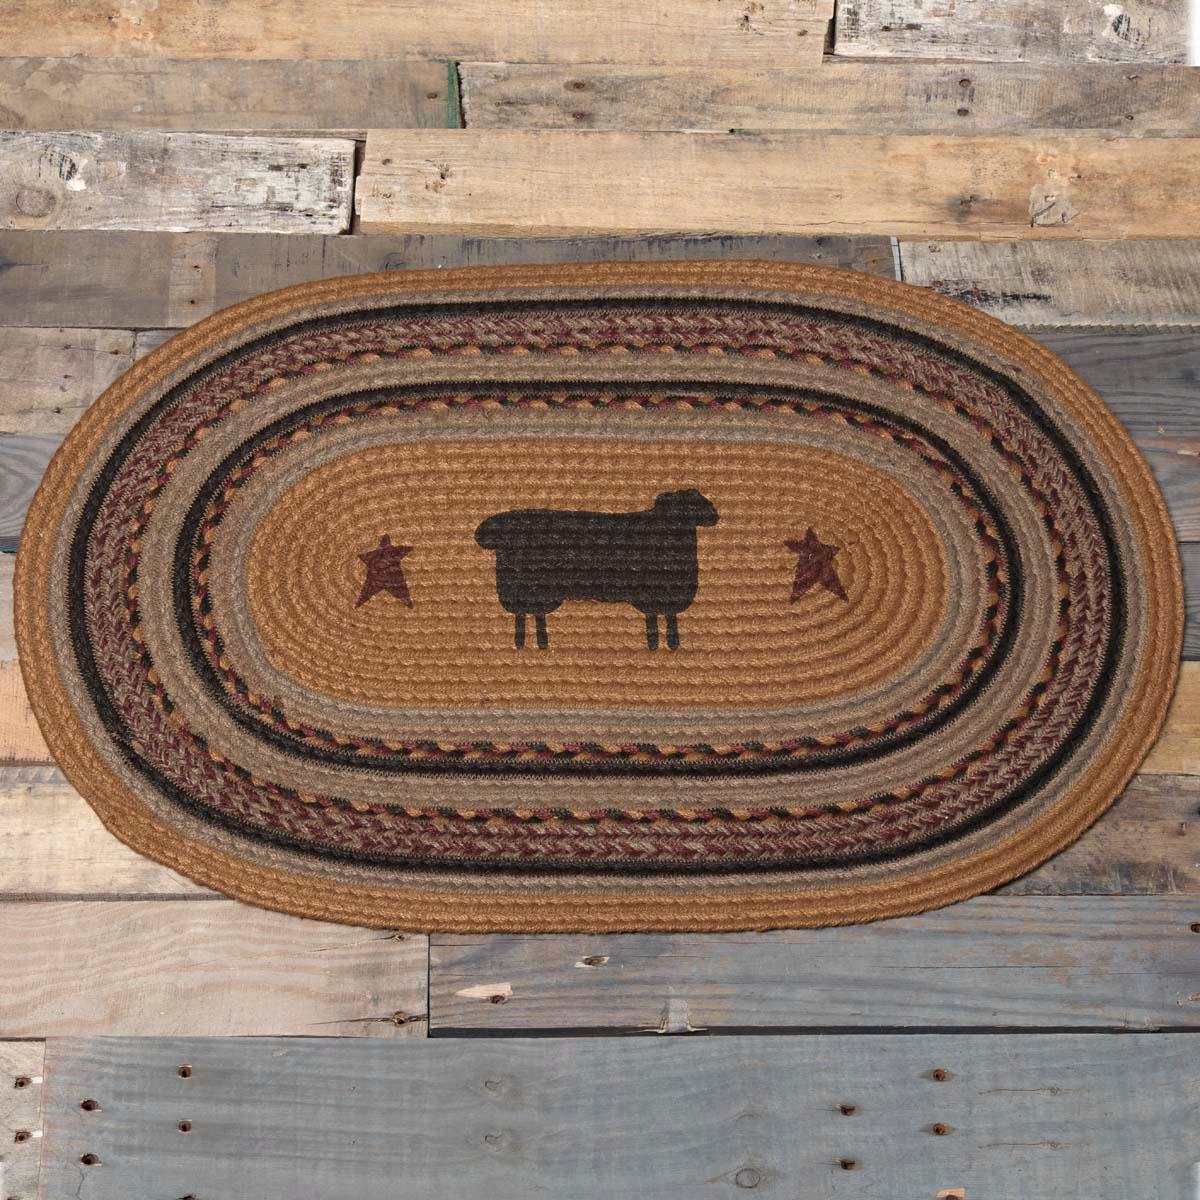 Heritage Farms Sheep Jute Braided Rug Oval 20"x30" with Rug Pad VHC Brands - The Fox Decor